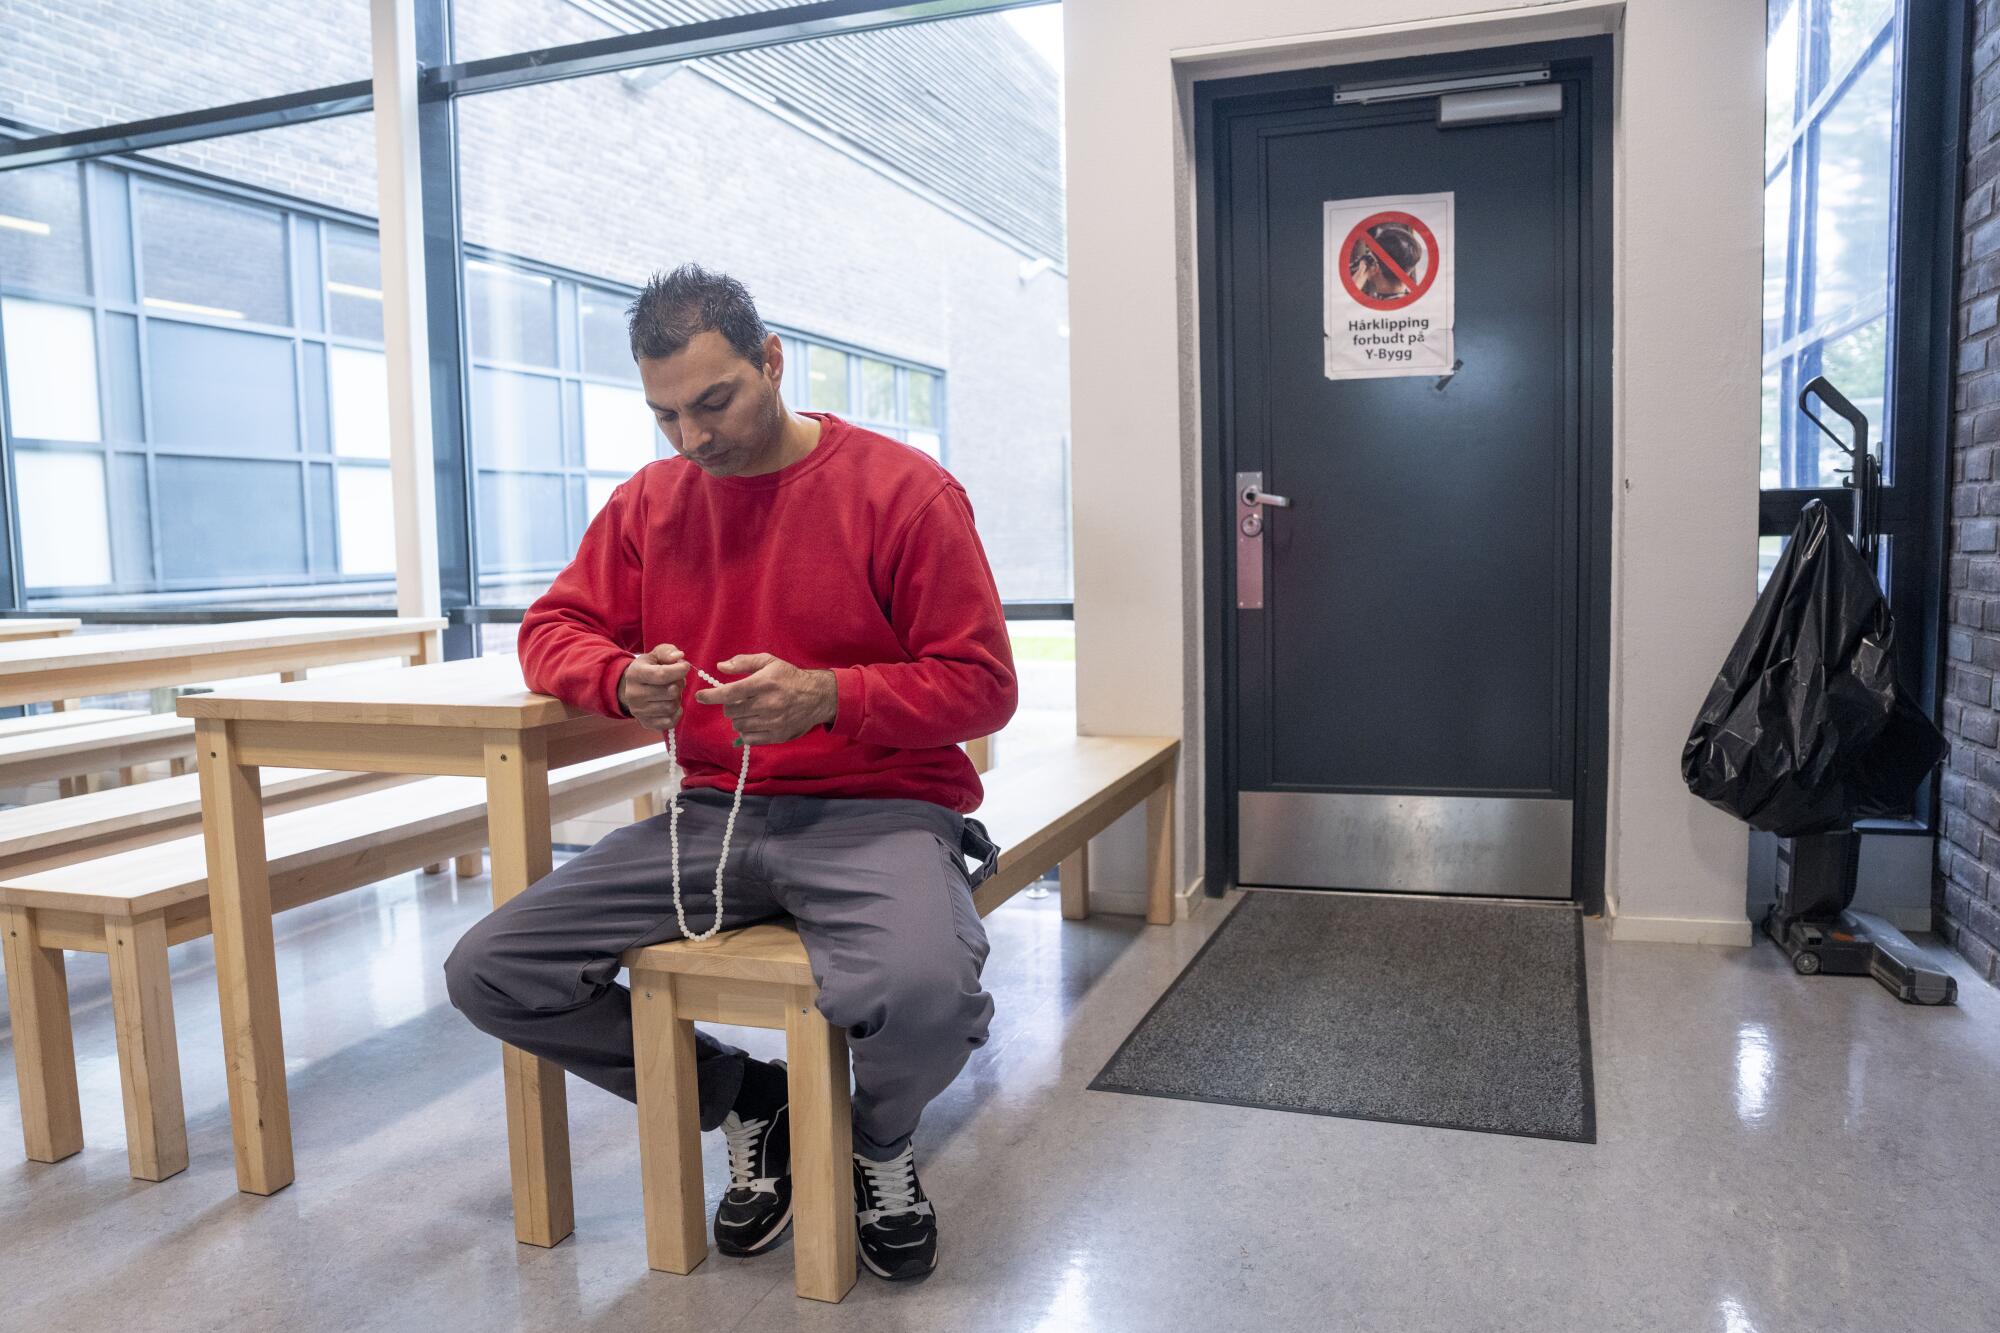 An inmate sits at a table at Halden prison.